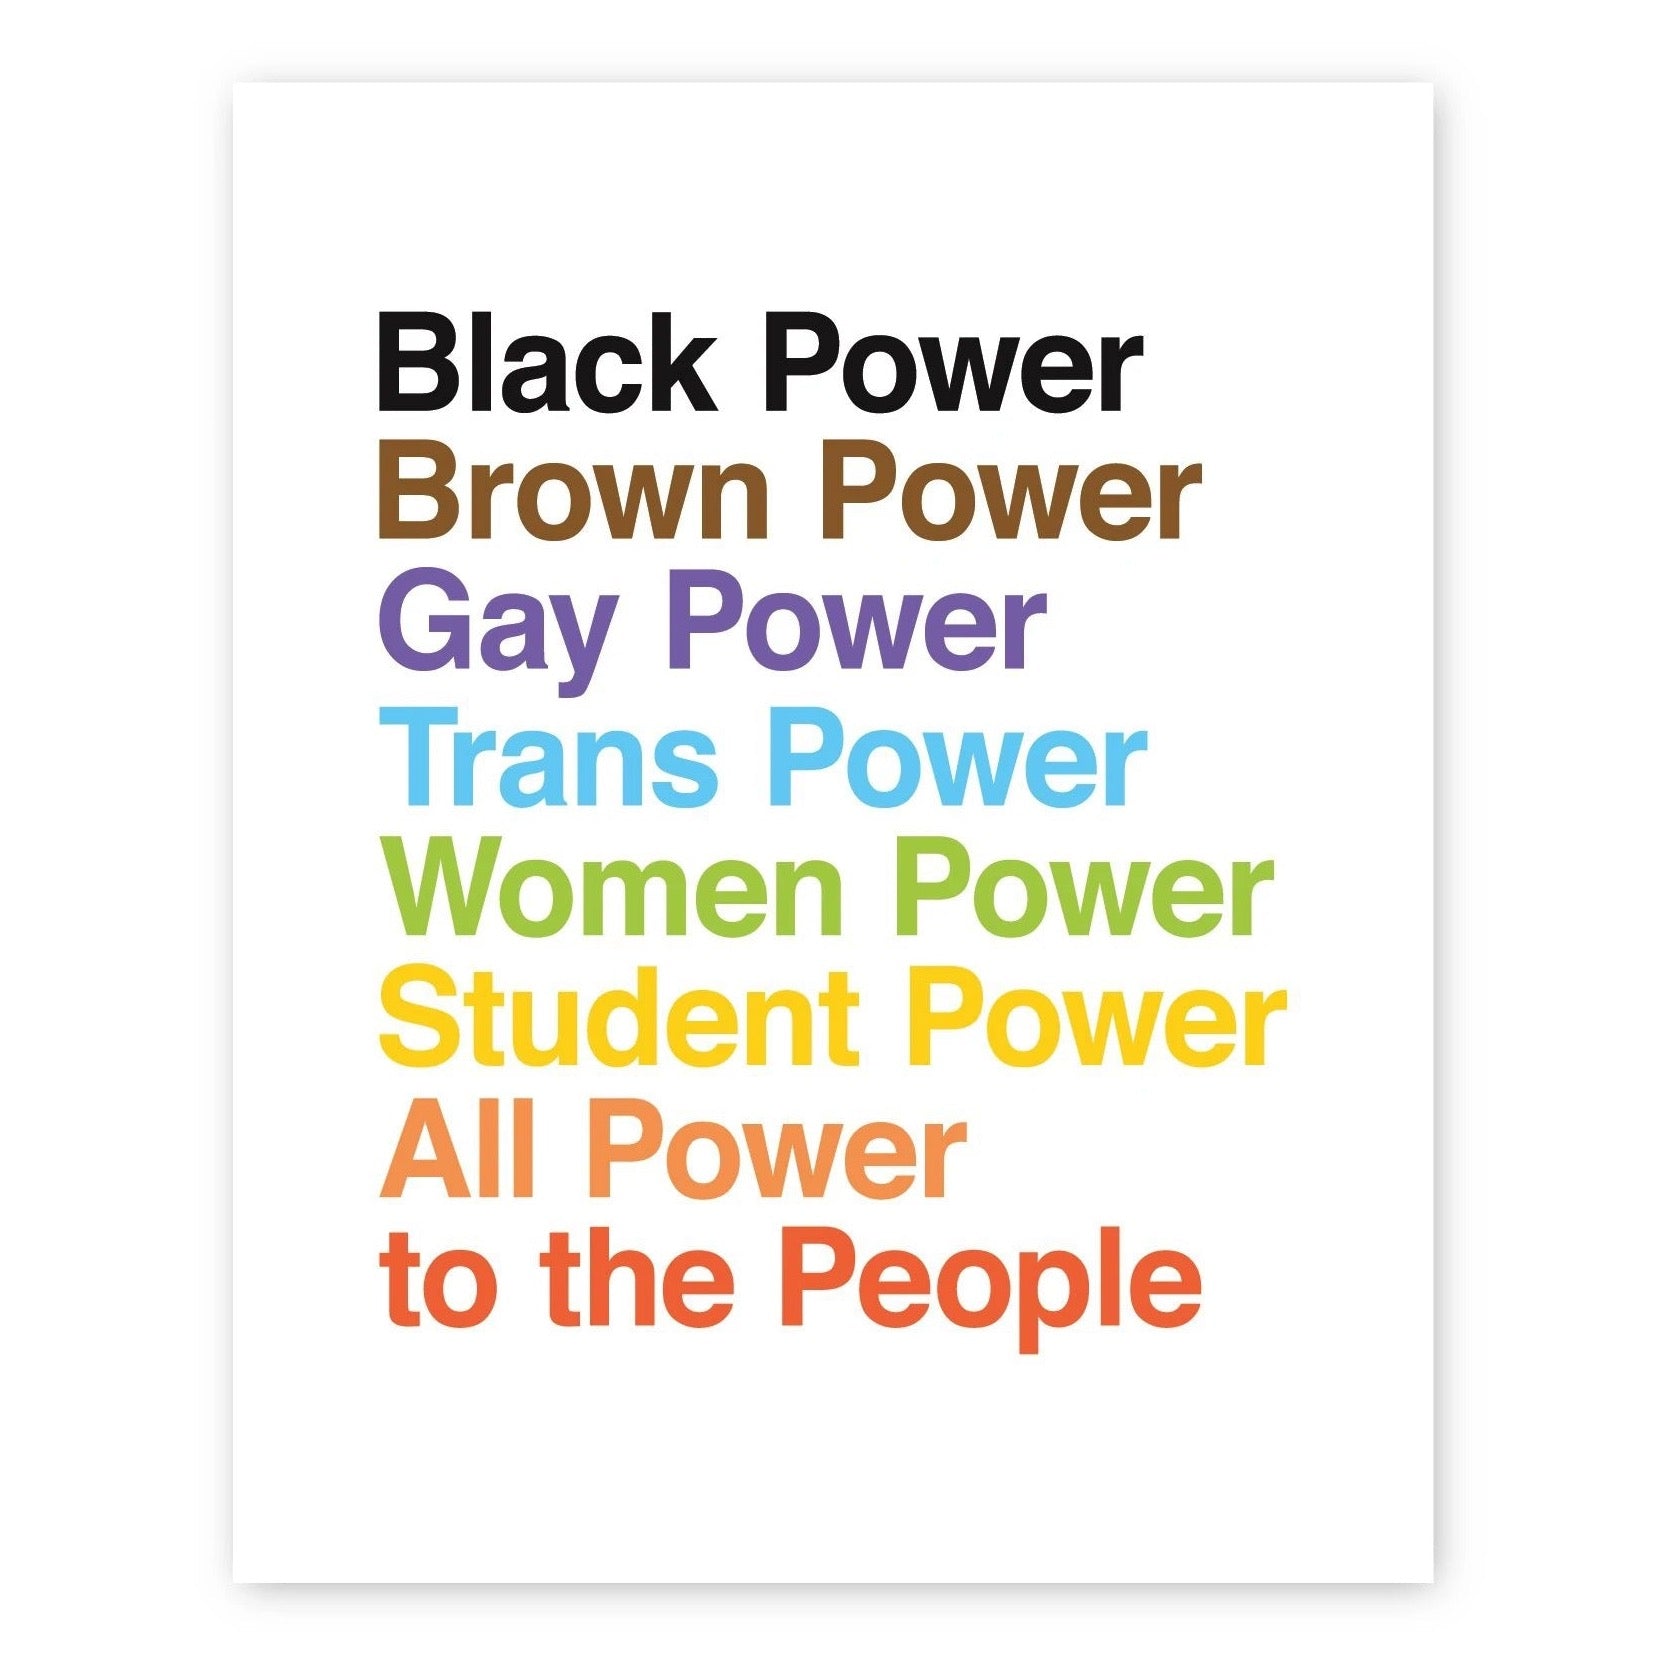 Protest Print: All Power to the People